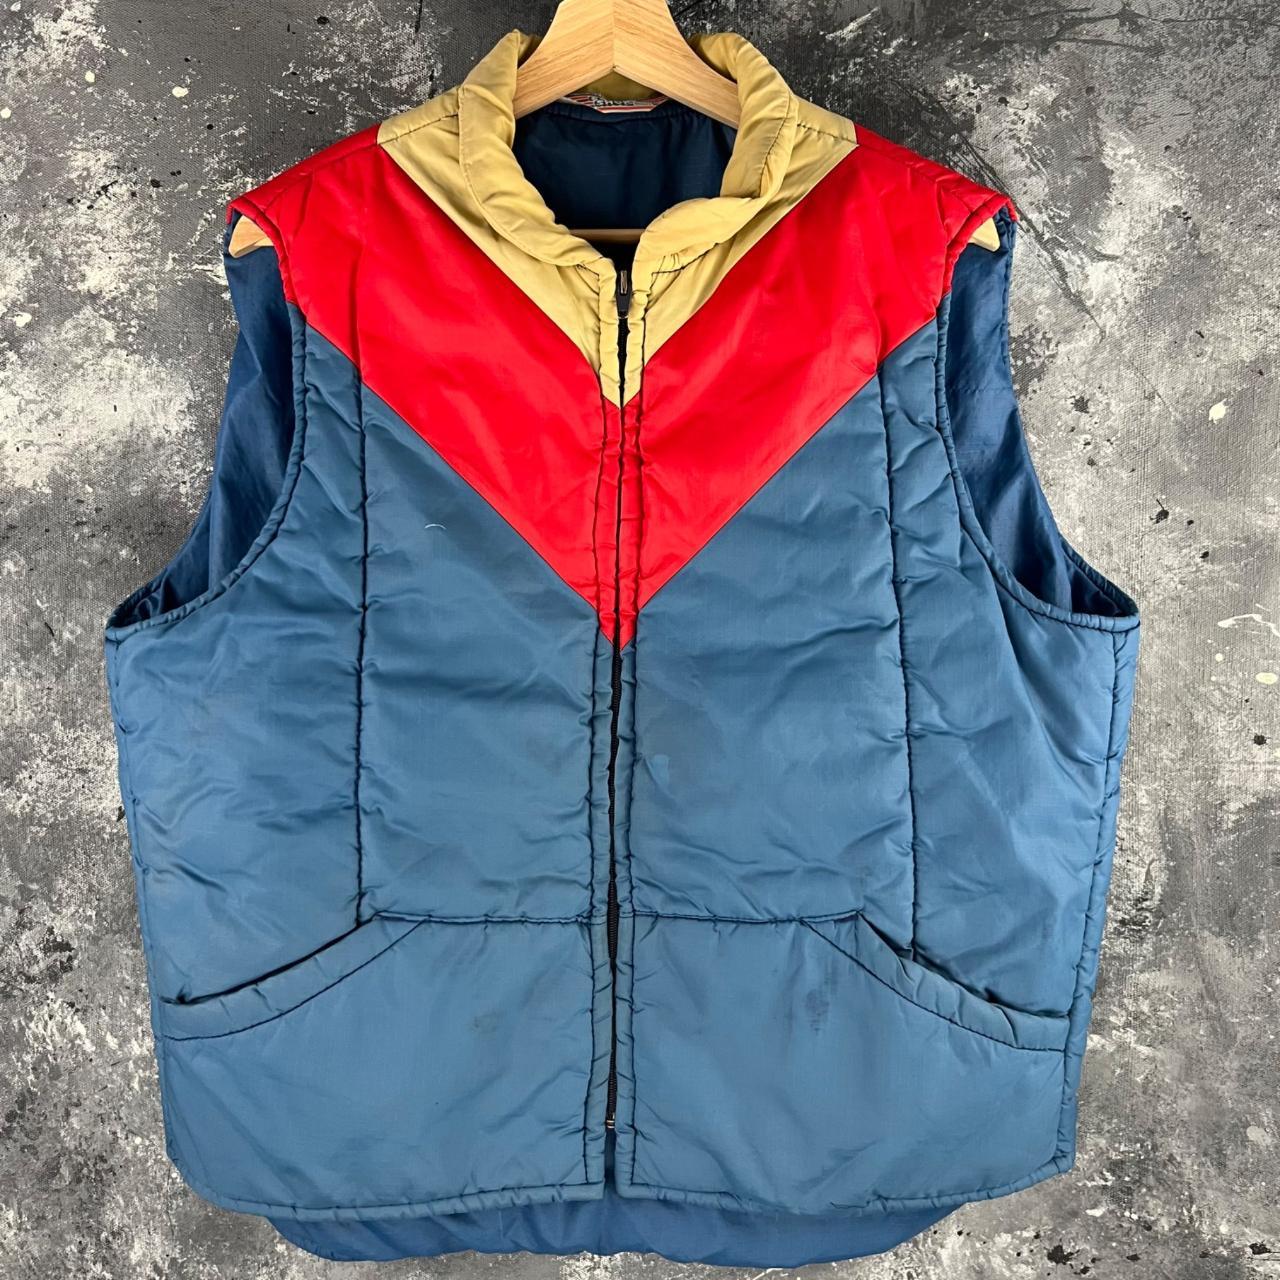 Vintage 80’s Sears puffer vest, Great colors, Fits...